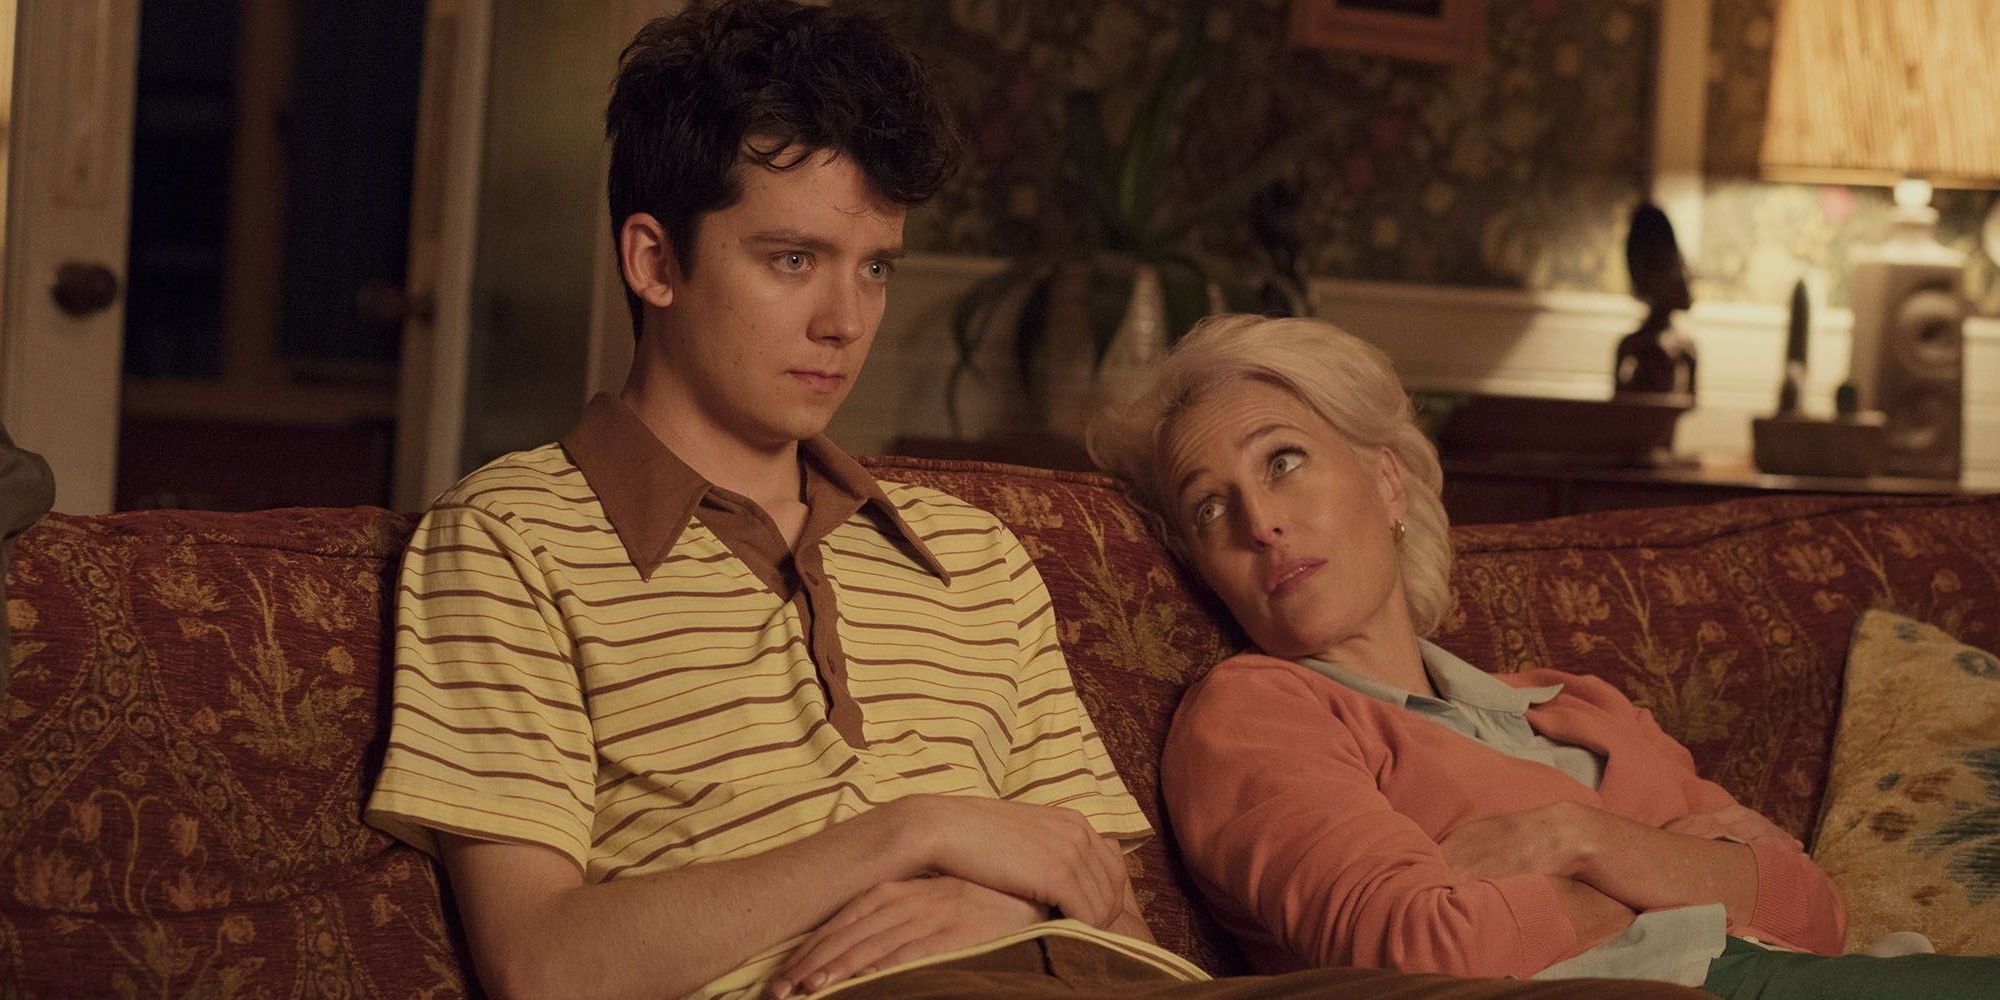 Sex Education Trailer Stars Gillian Anderson And Asa Butterfield